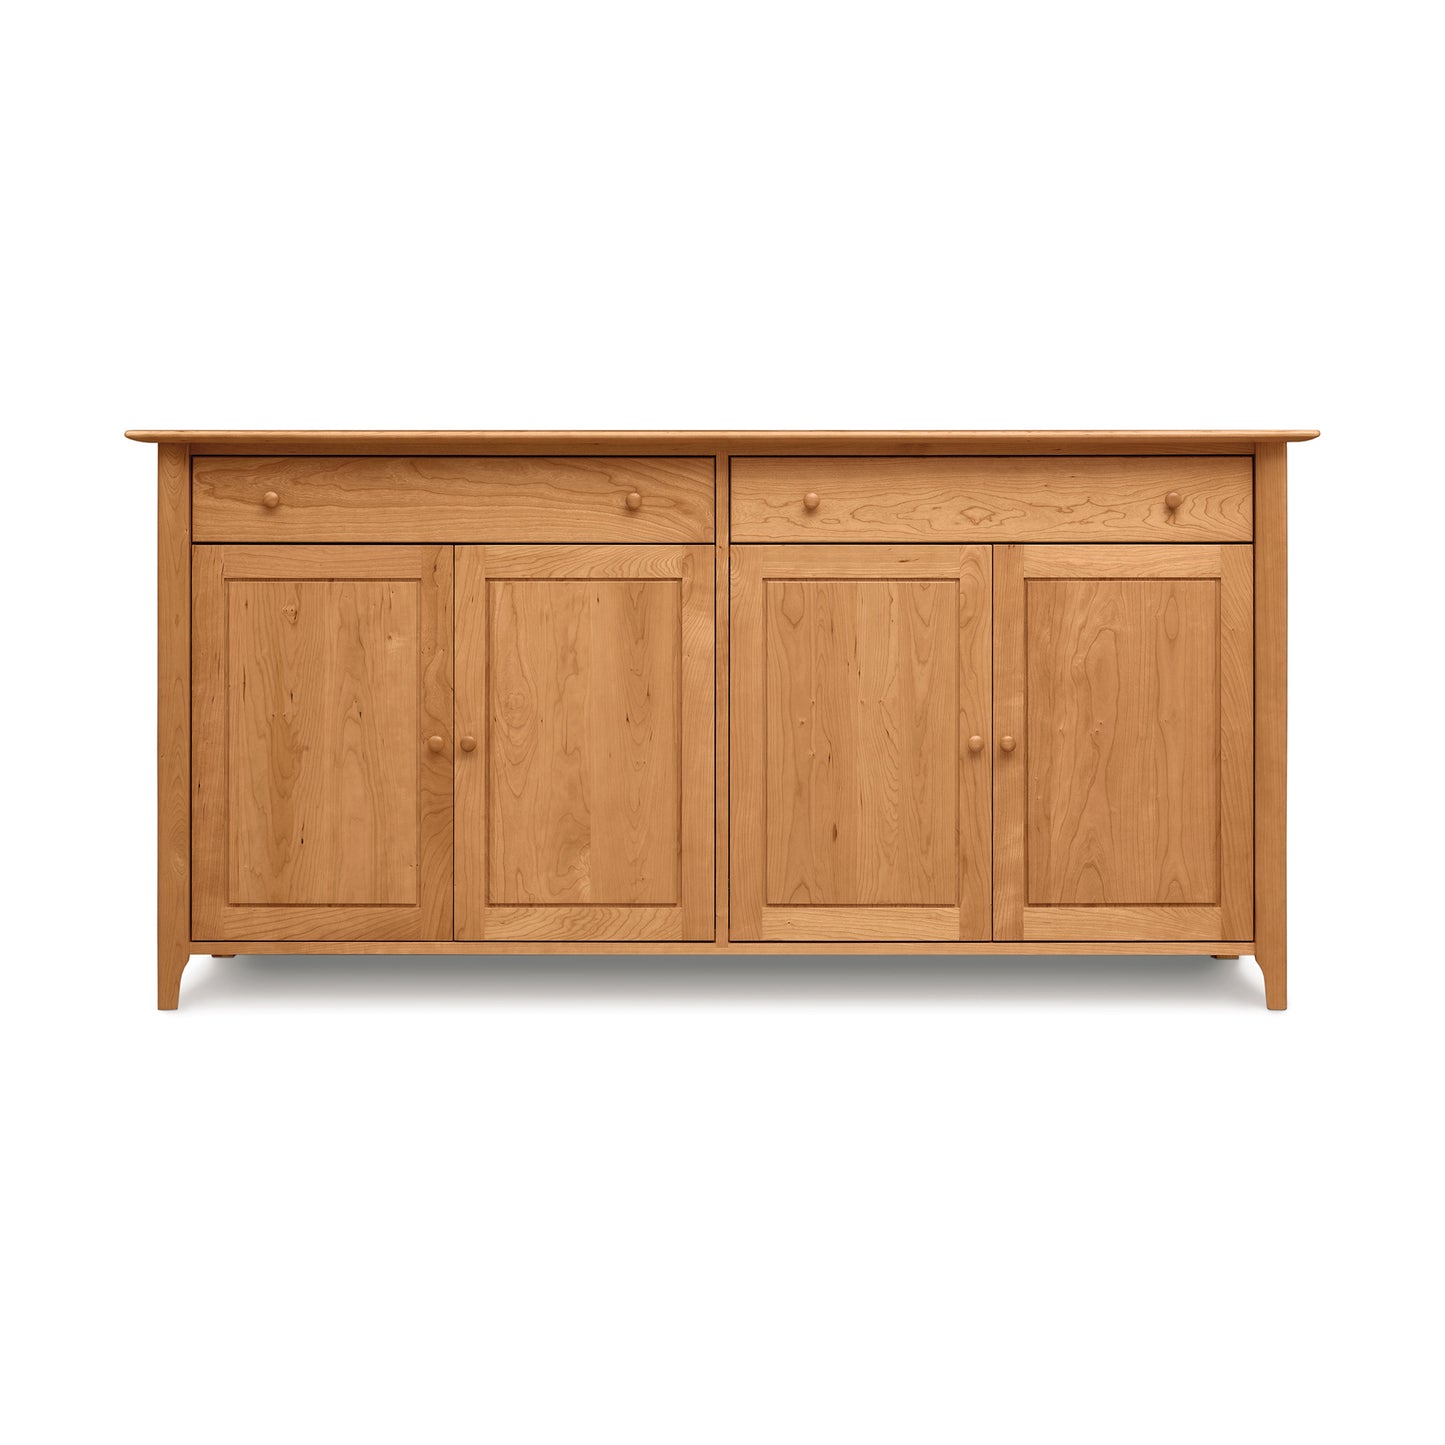 A Copeland Furniture Sarah 2-Drawer, 4-Door Buffet with three doors on a white background.